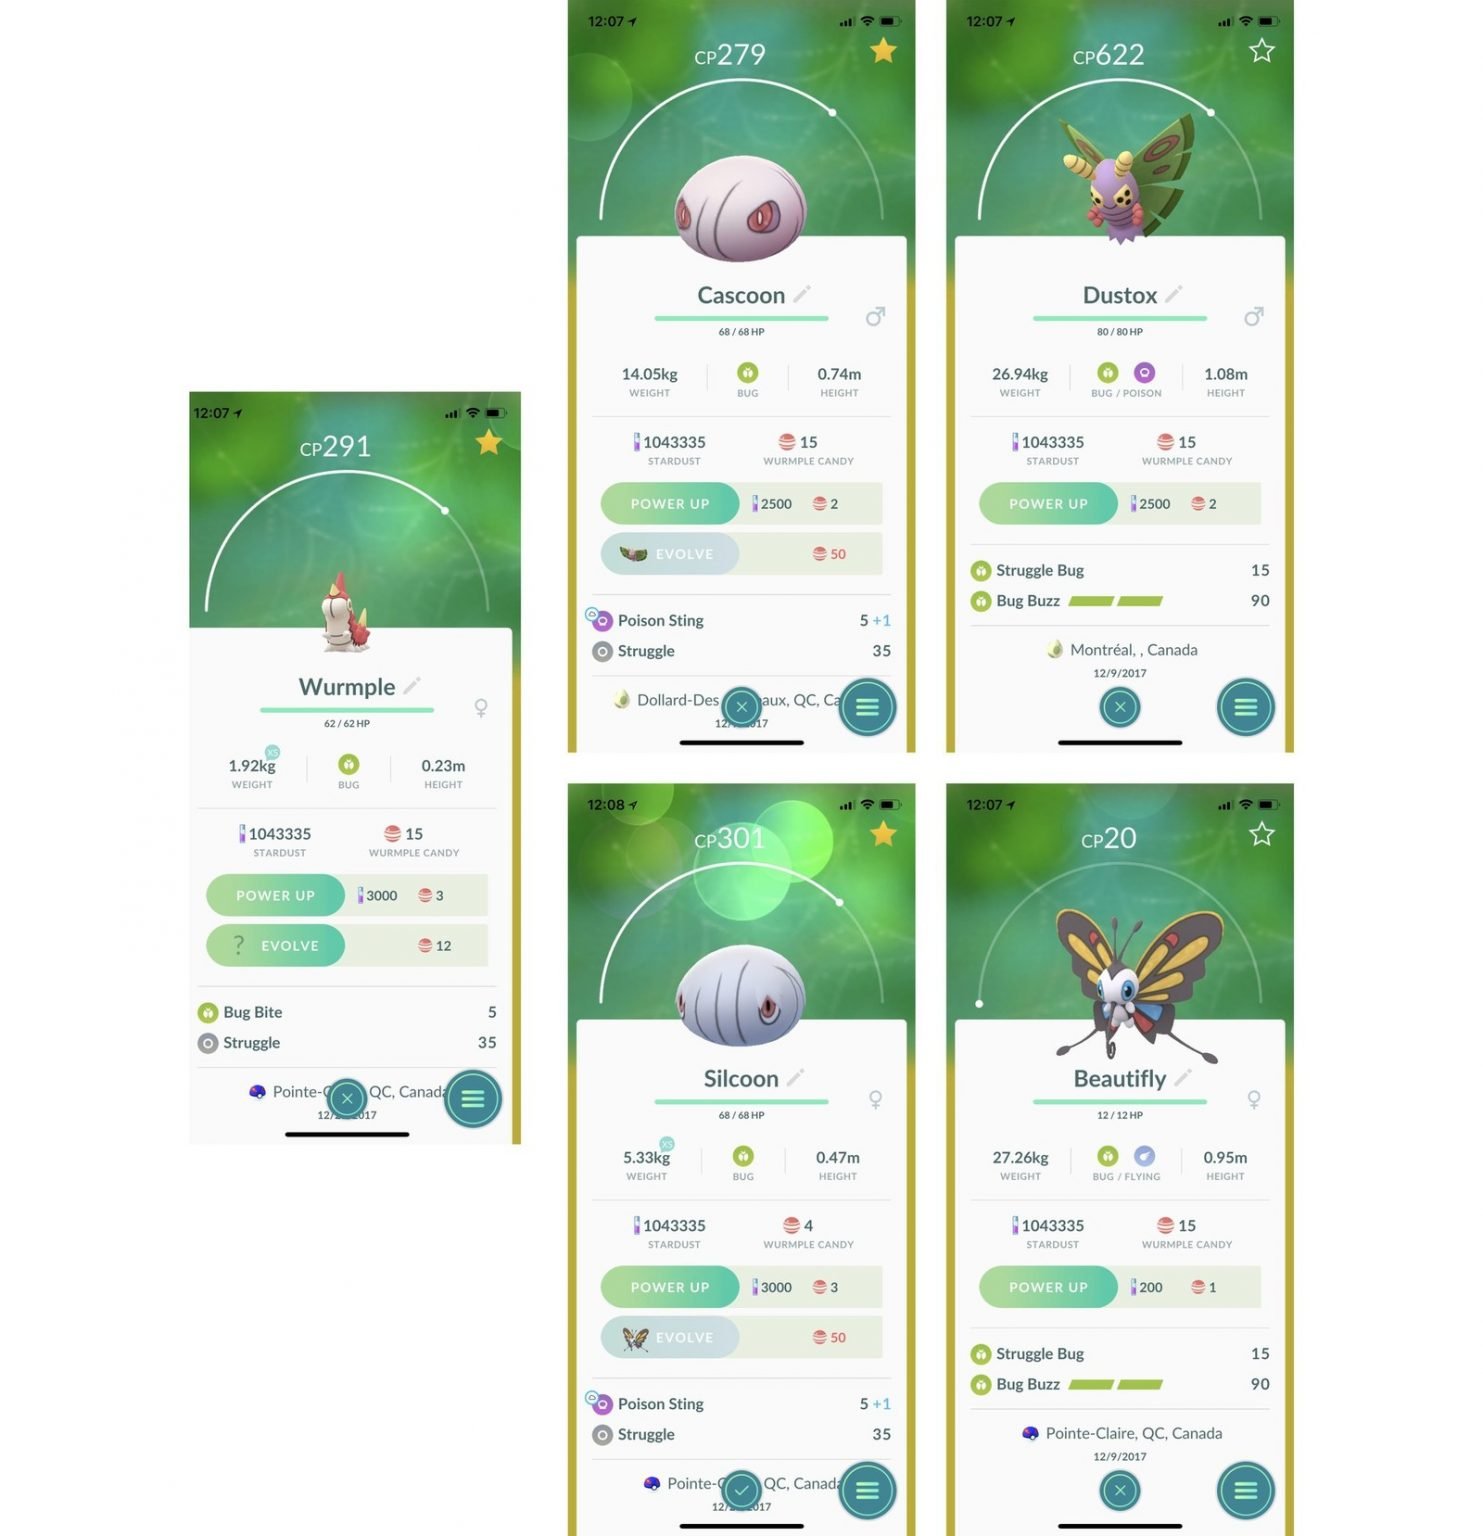 How To Get Silcoon In Pokemon Go